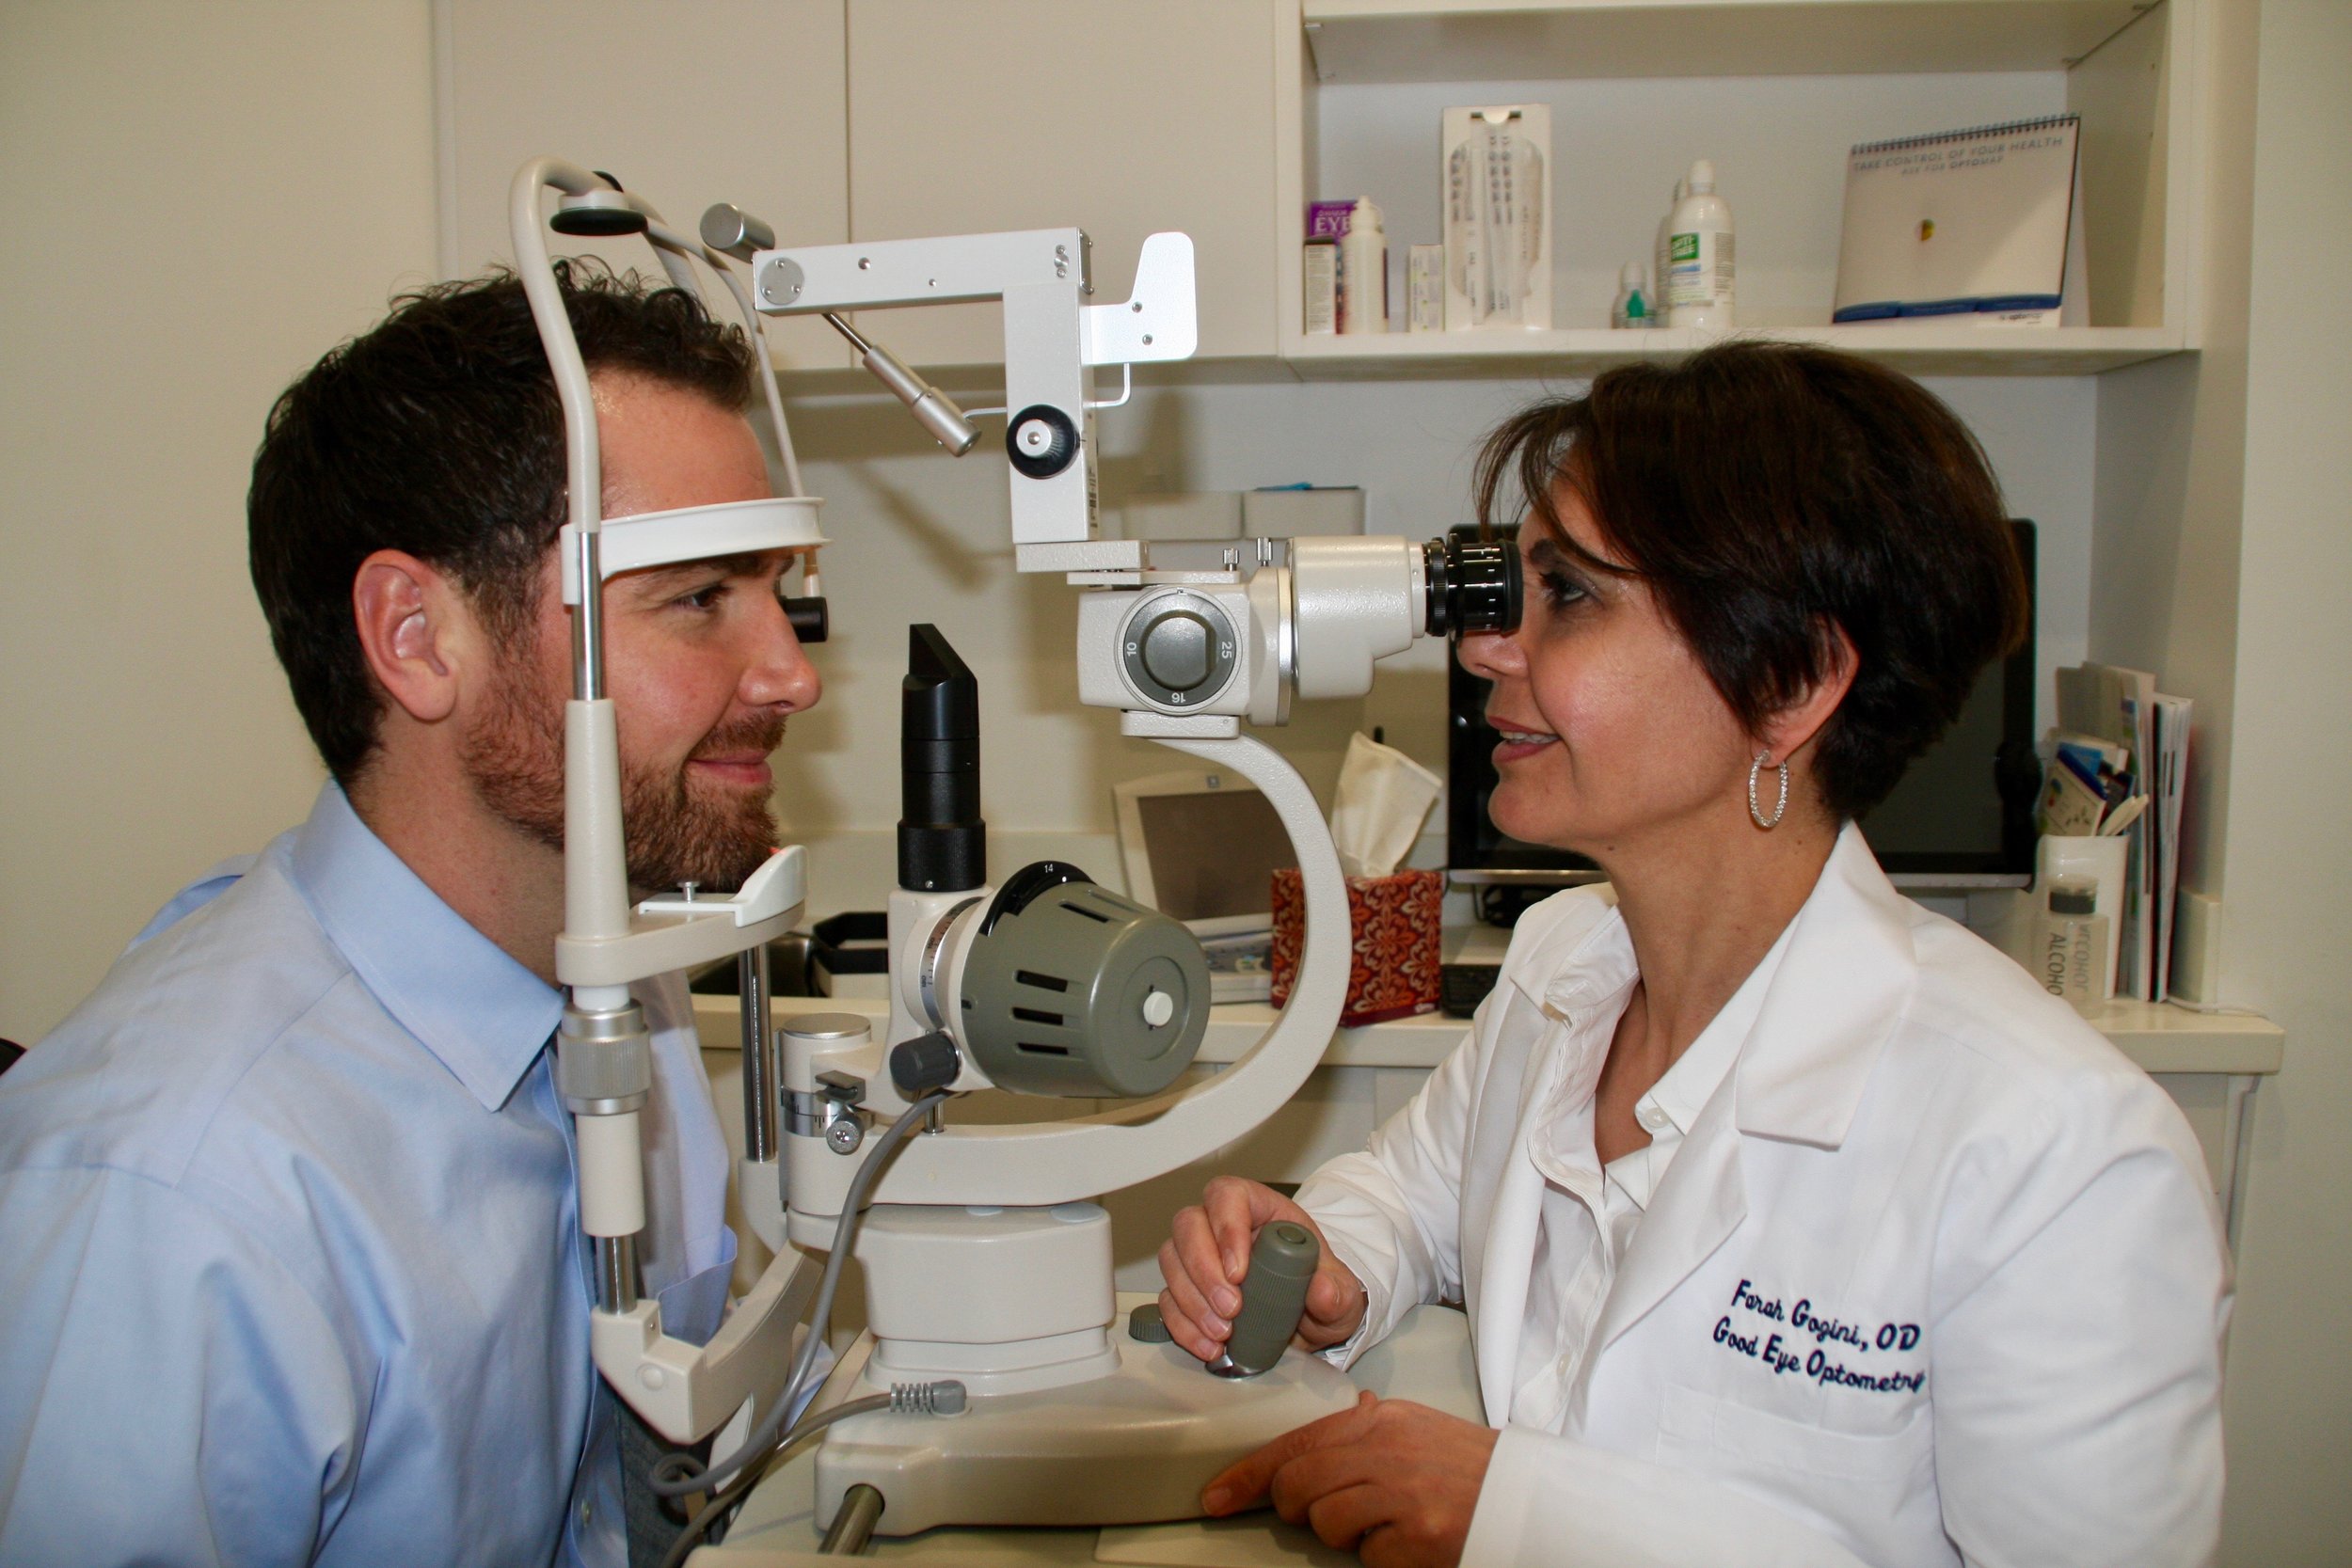 Dr. Gozini administering an eye exam to a patient.